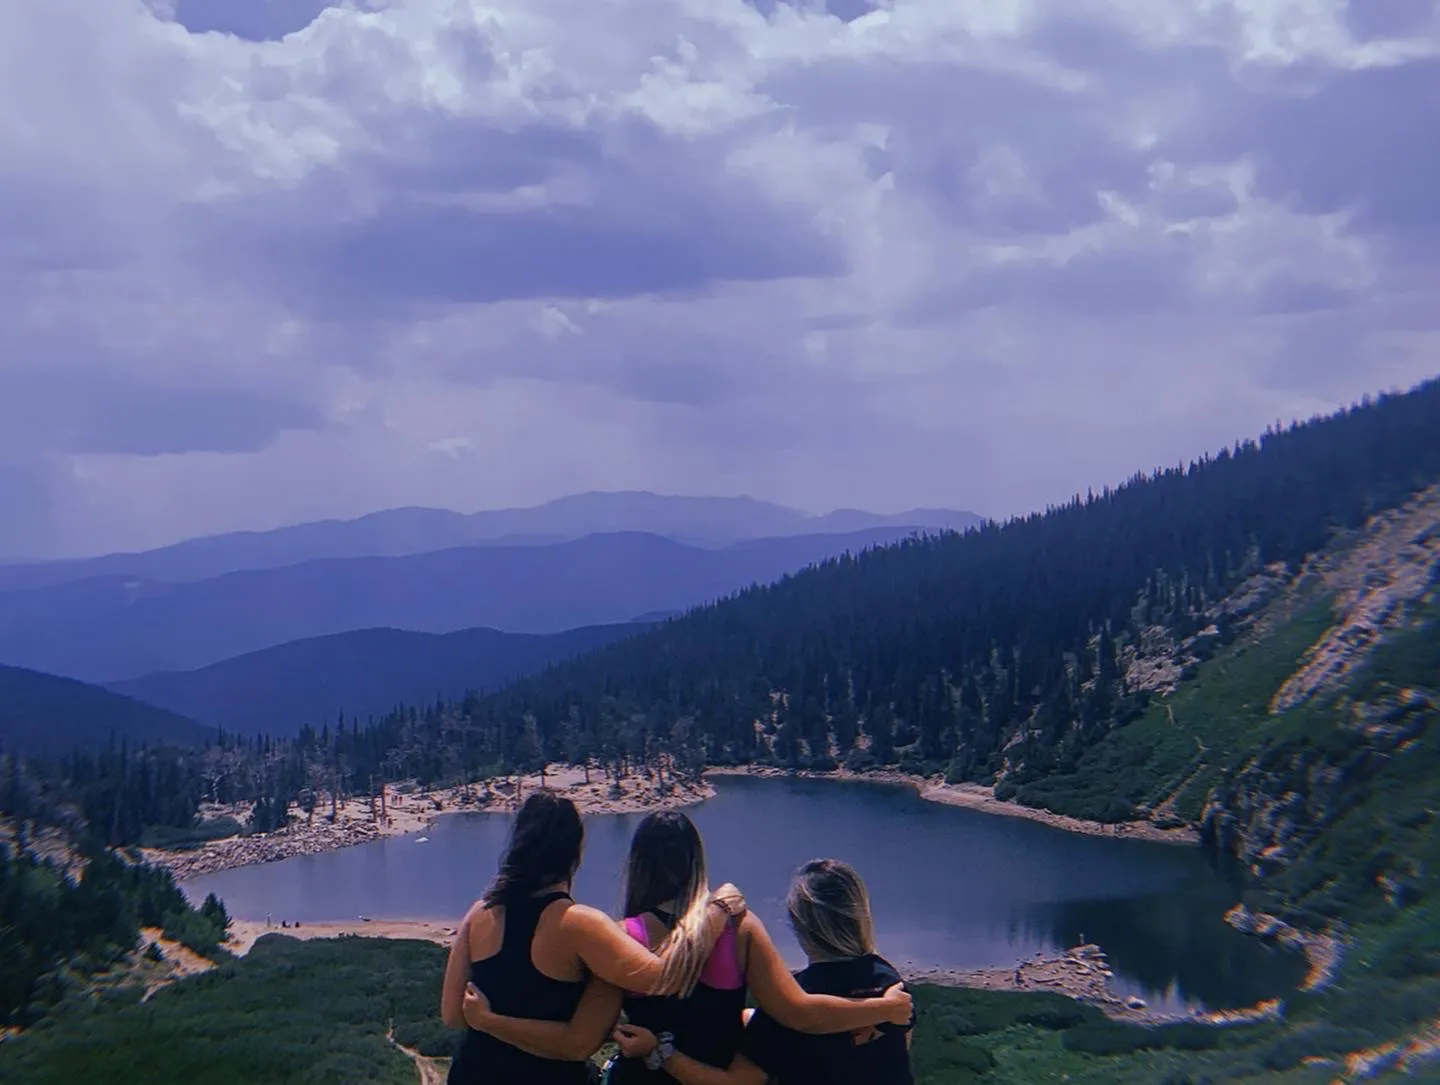 Image of friends from behind showing an amazing mountainous view in the background